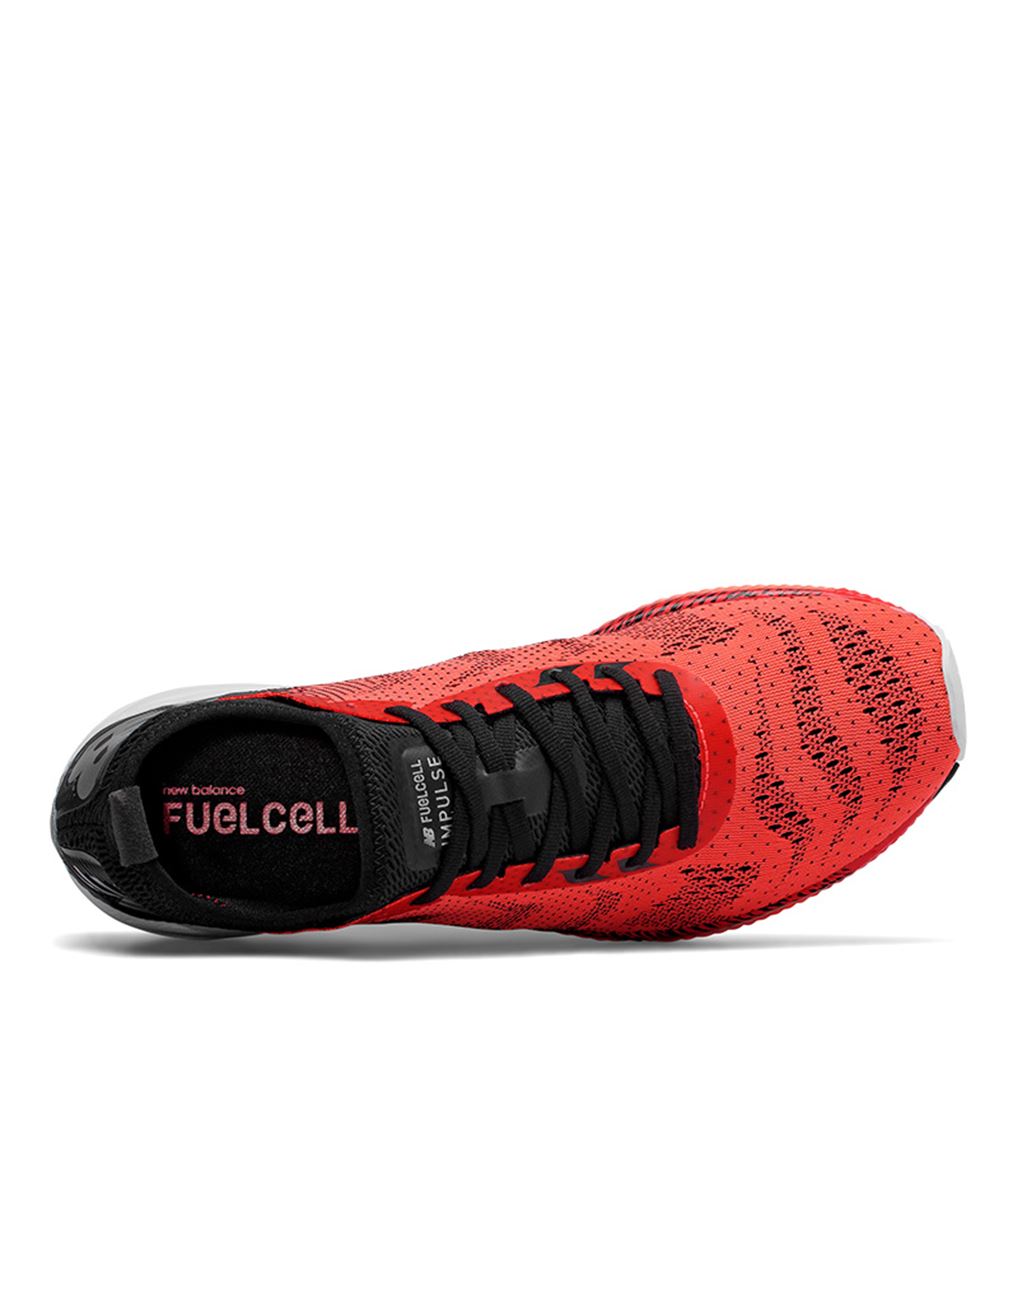 FuelCell Impulse < Shoes | New Balance